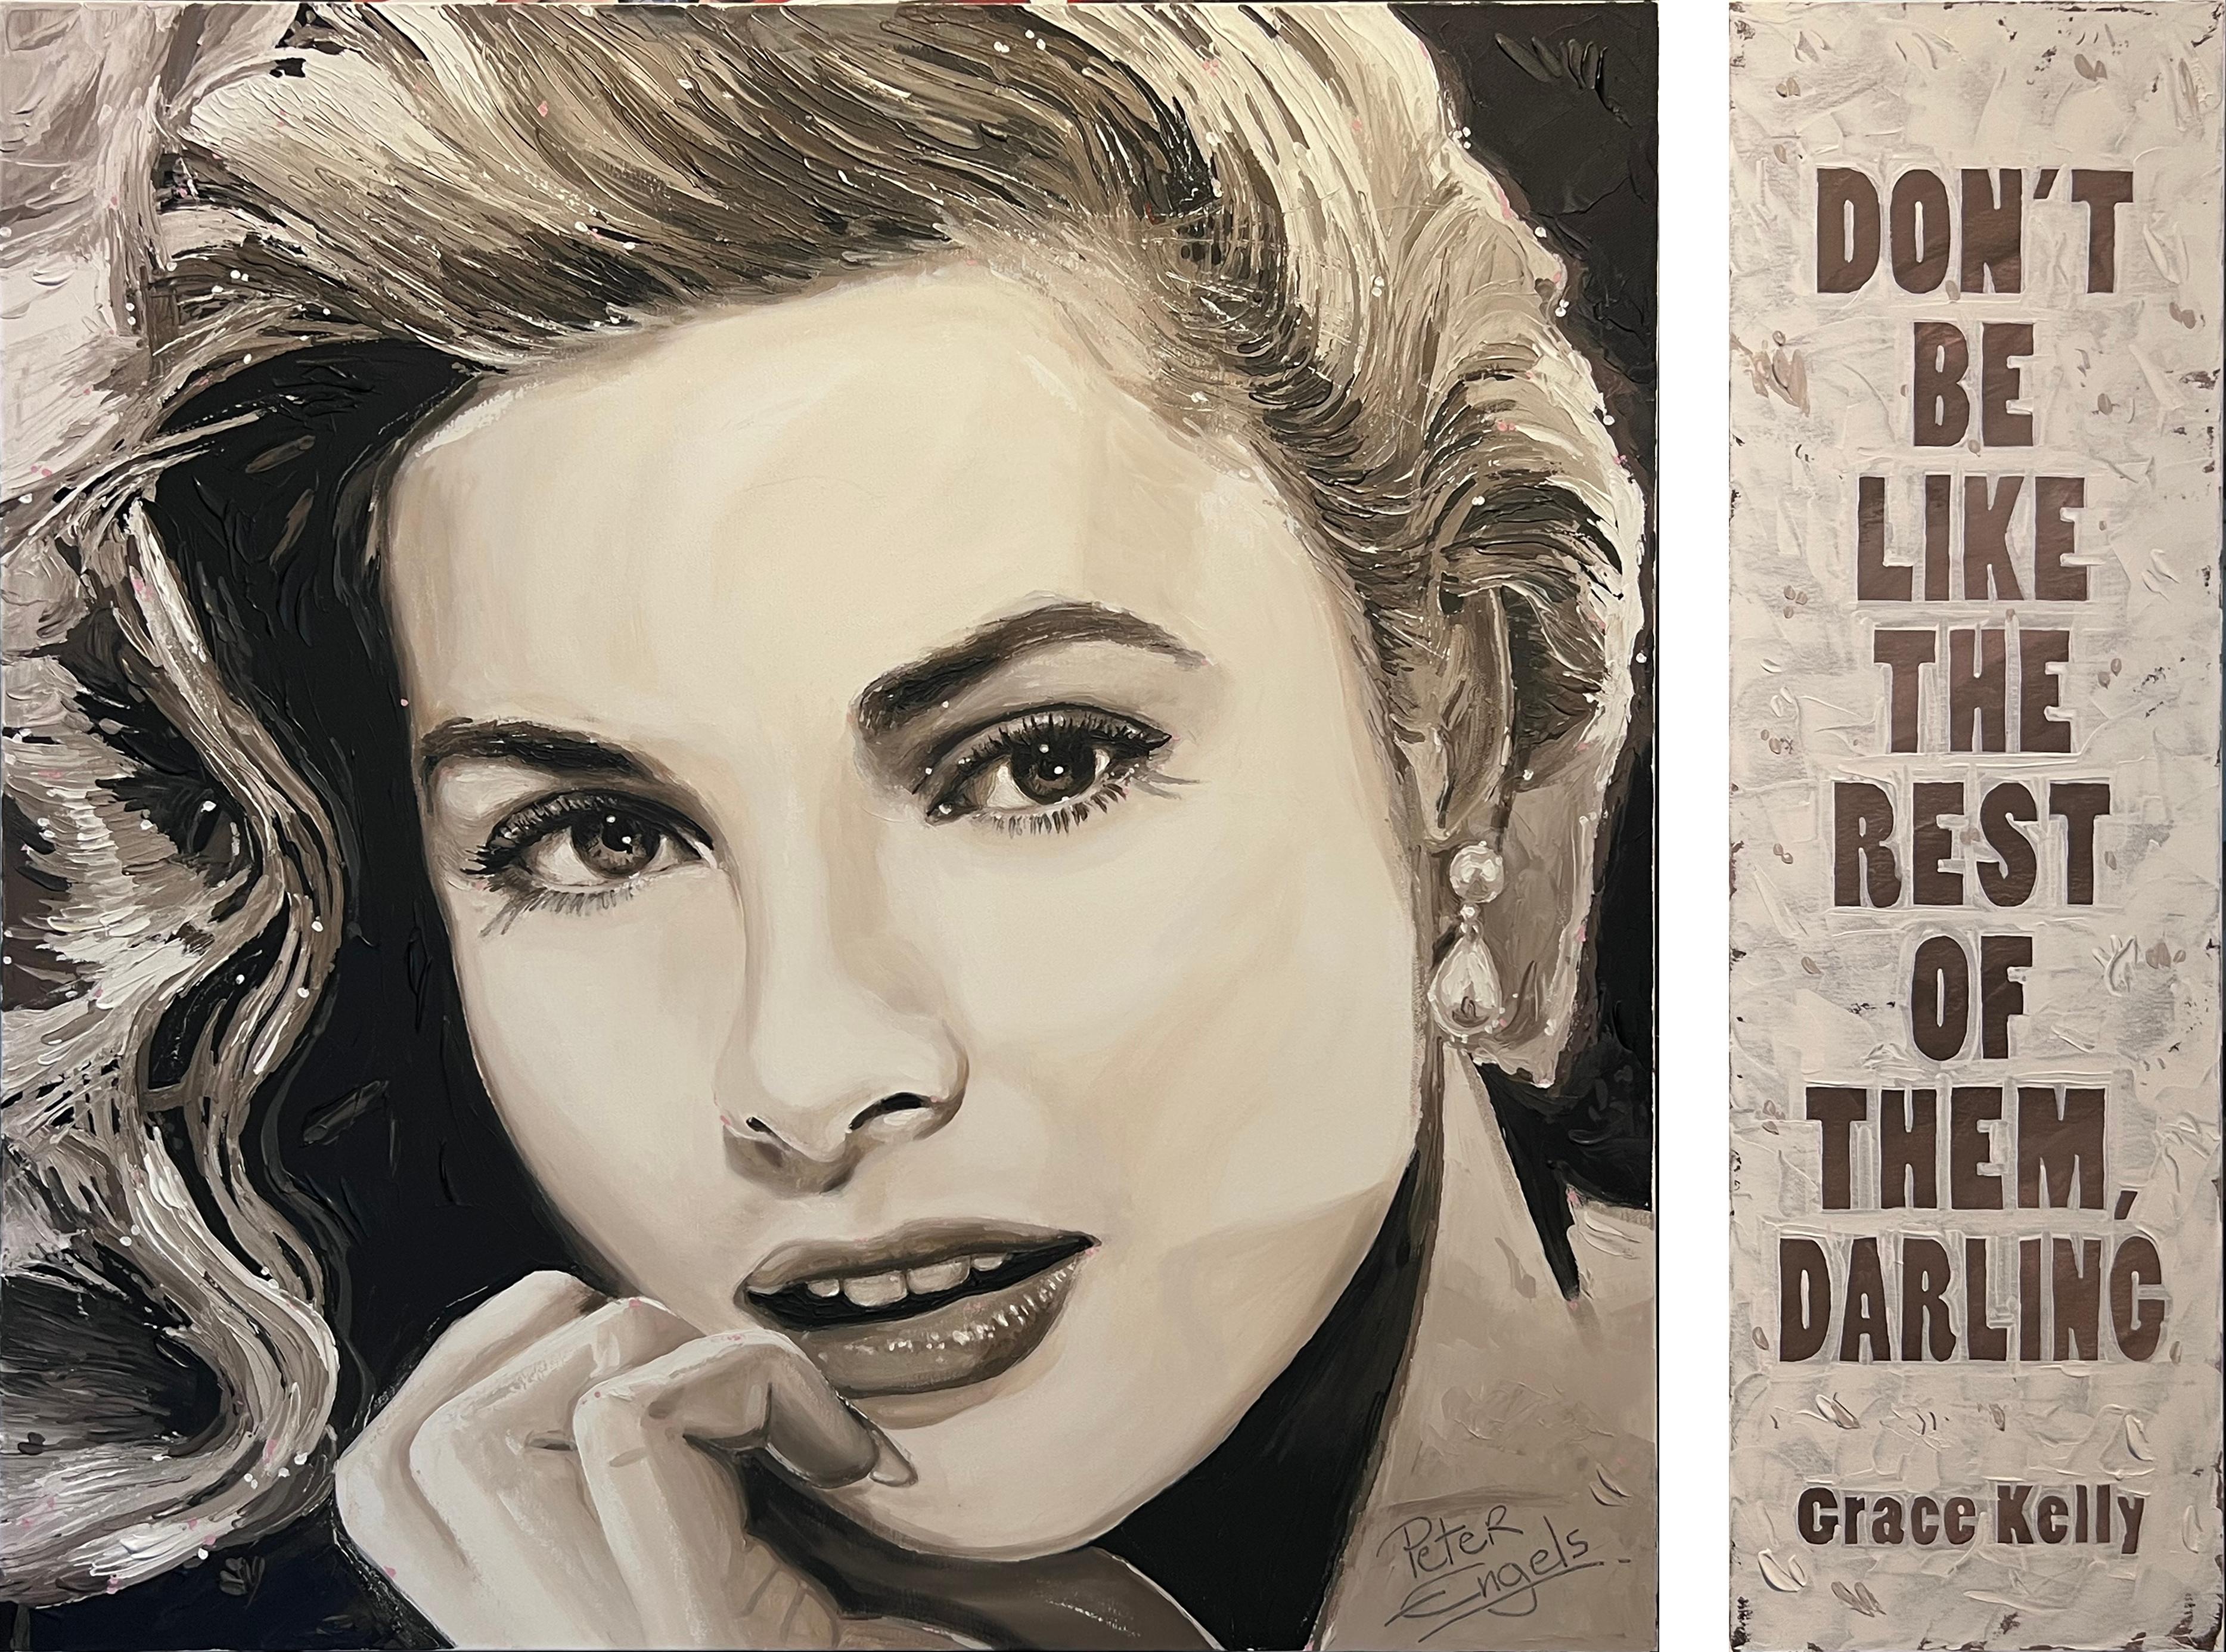 Grace Kelly with inspirational quote - modern portraiture iconic famous painting